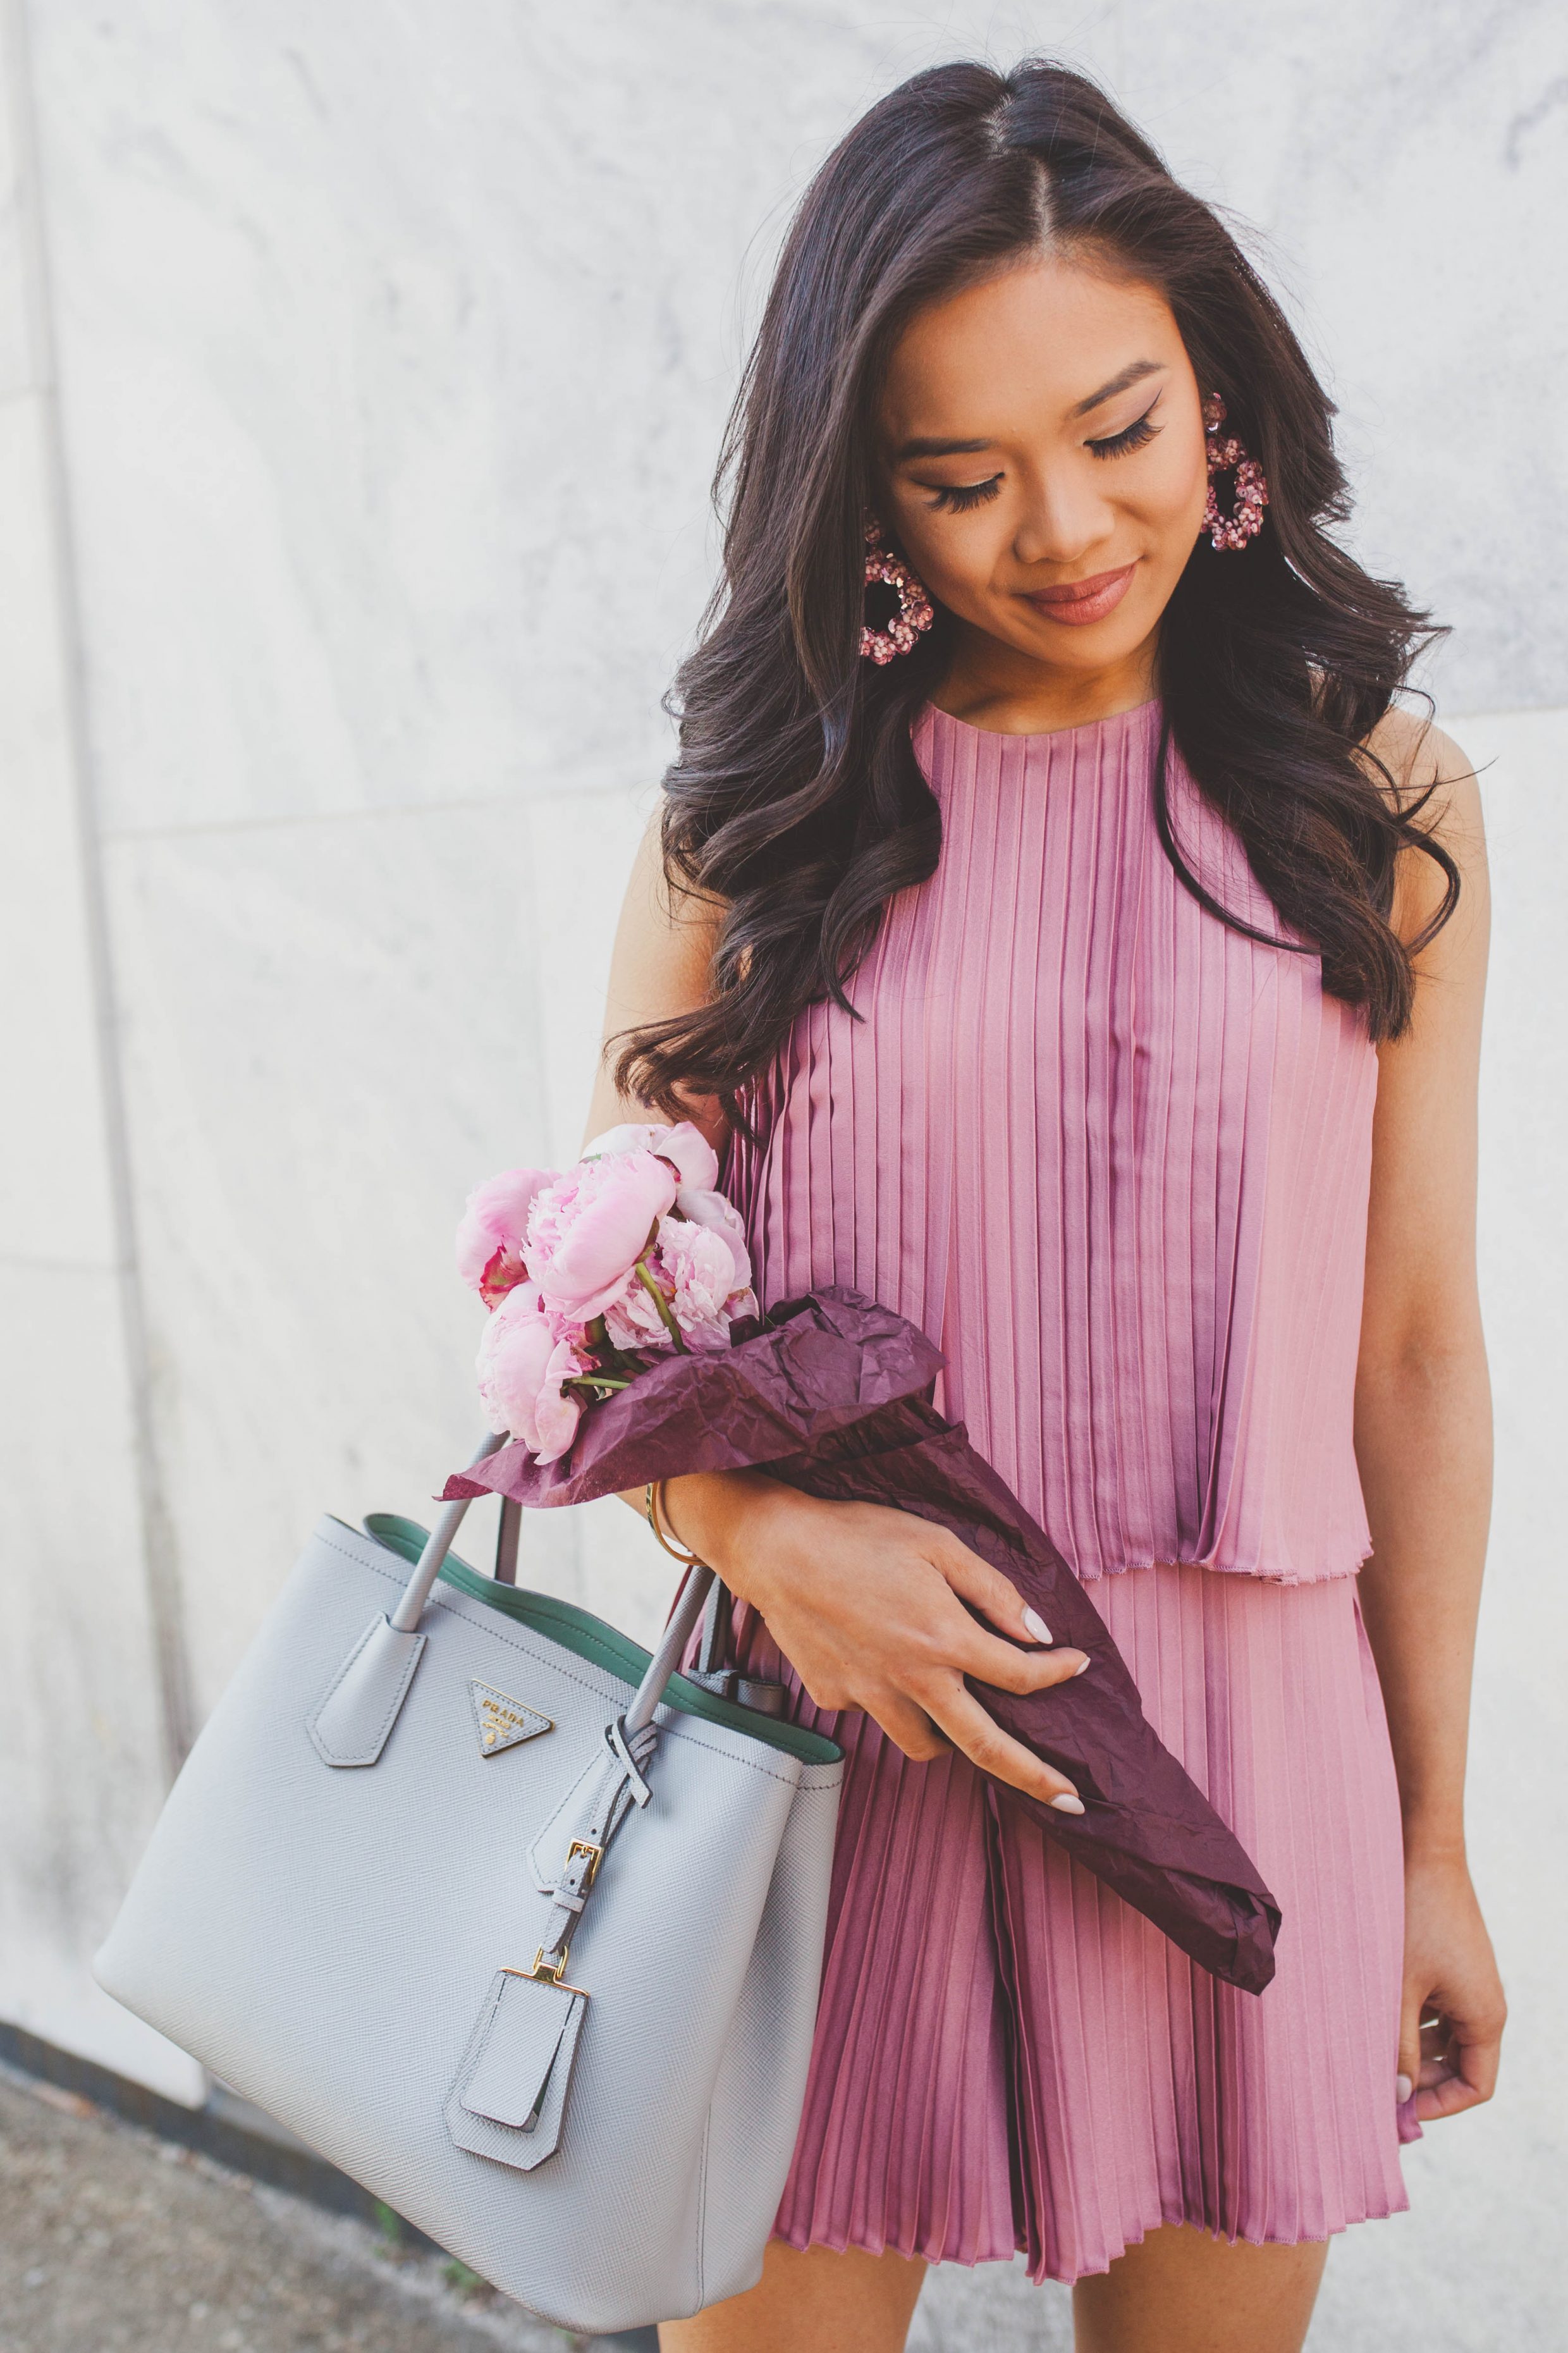 Blogger Hoang-Kim wears a pink pleated romper with pink sequin earrings and pink peonies